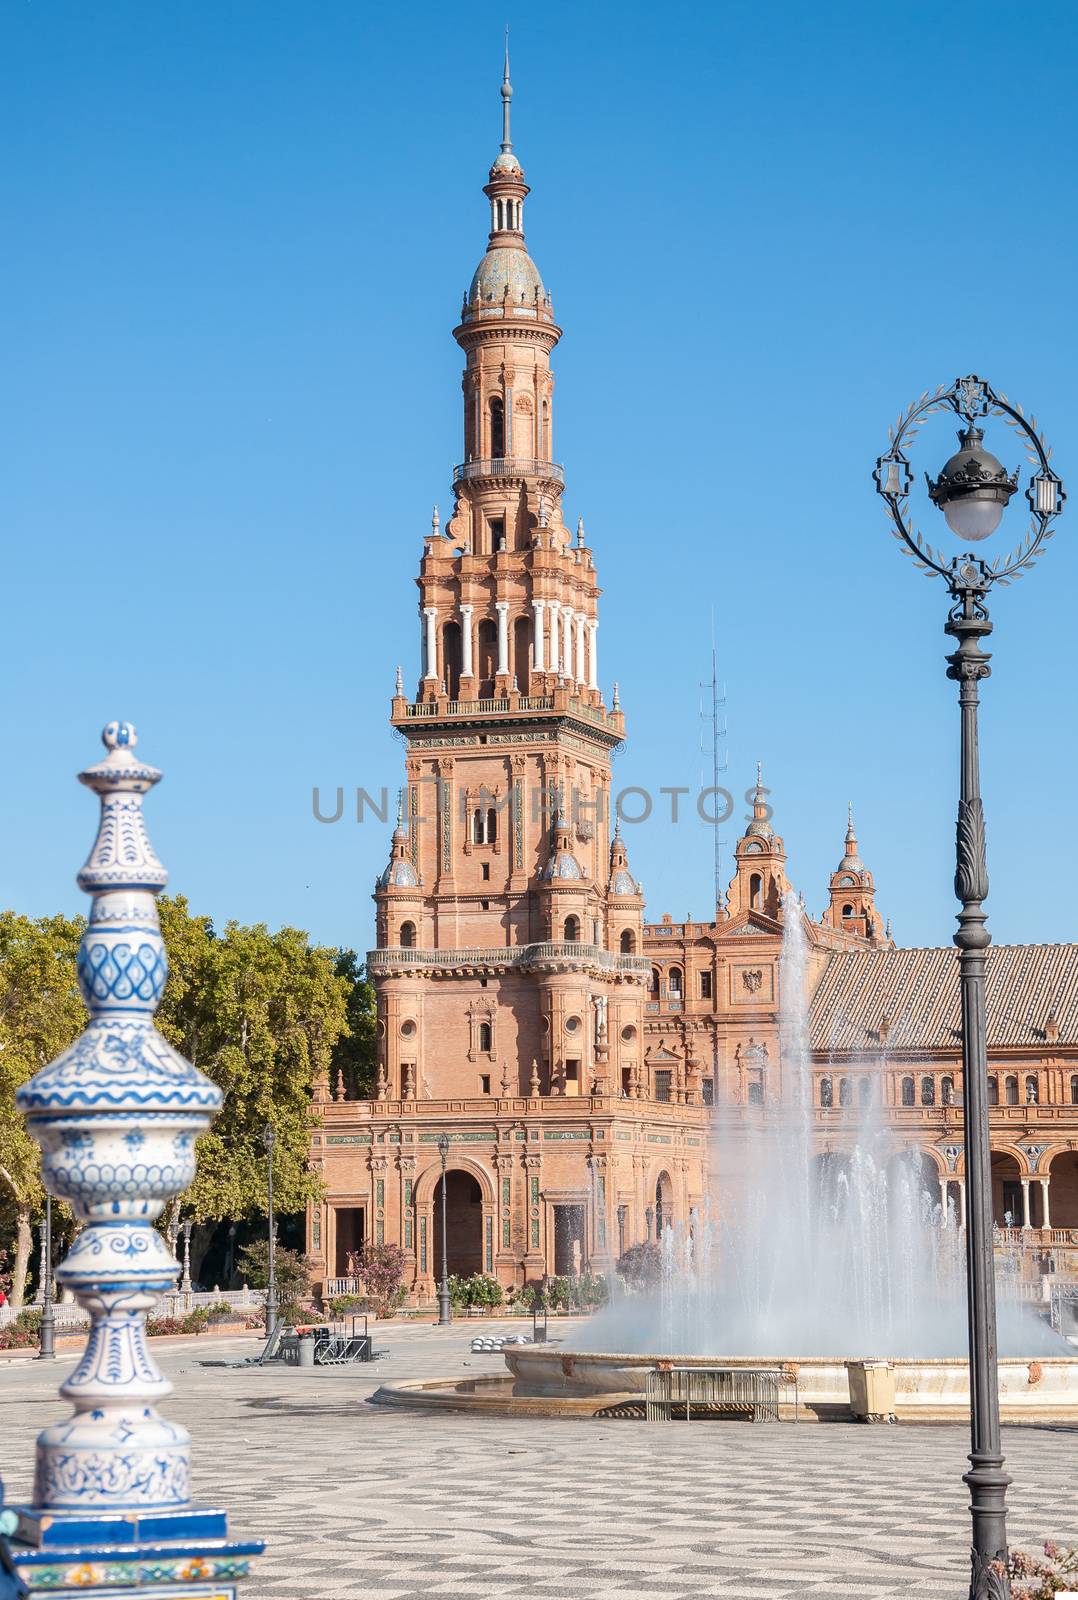 Tower of the Plaza de Espana in Seville by mkos83